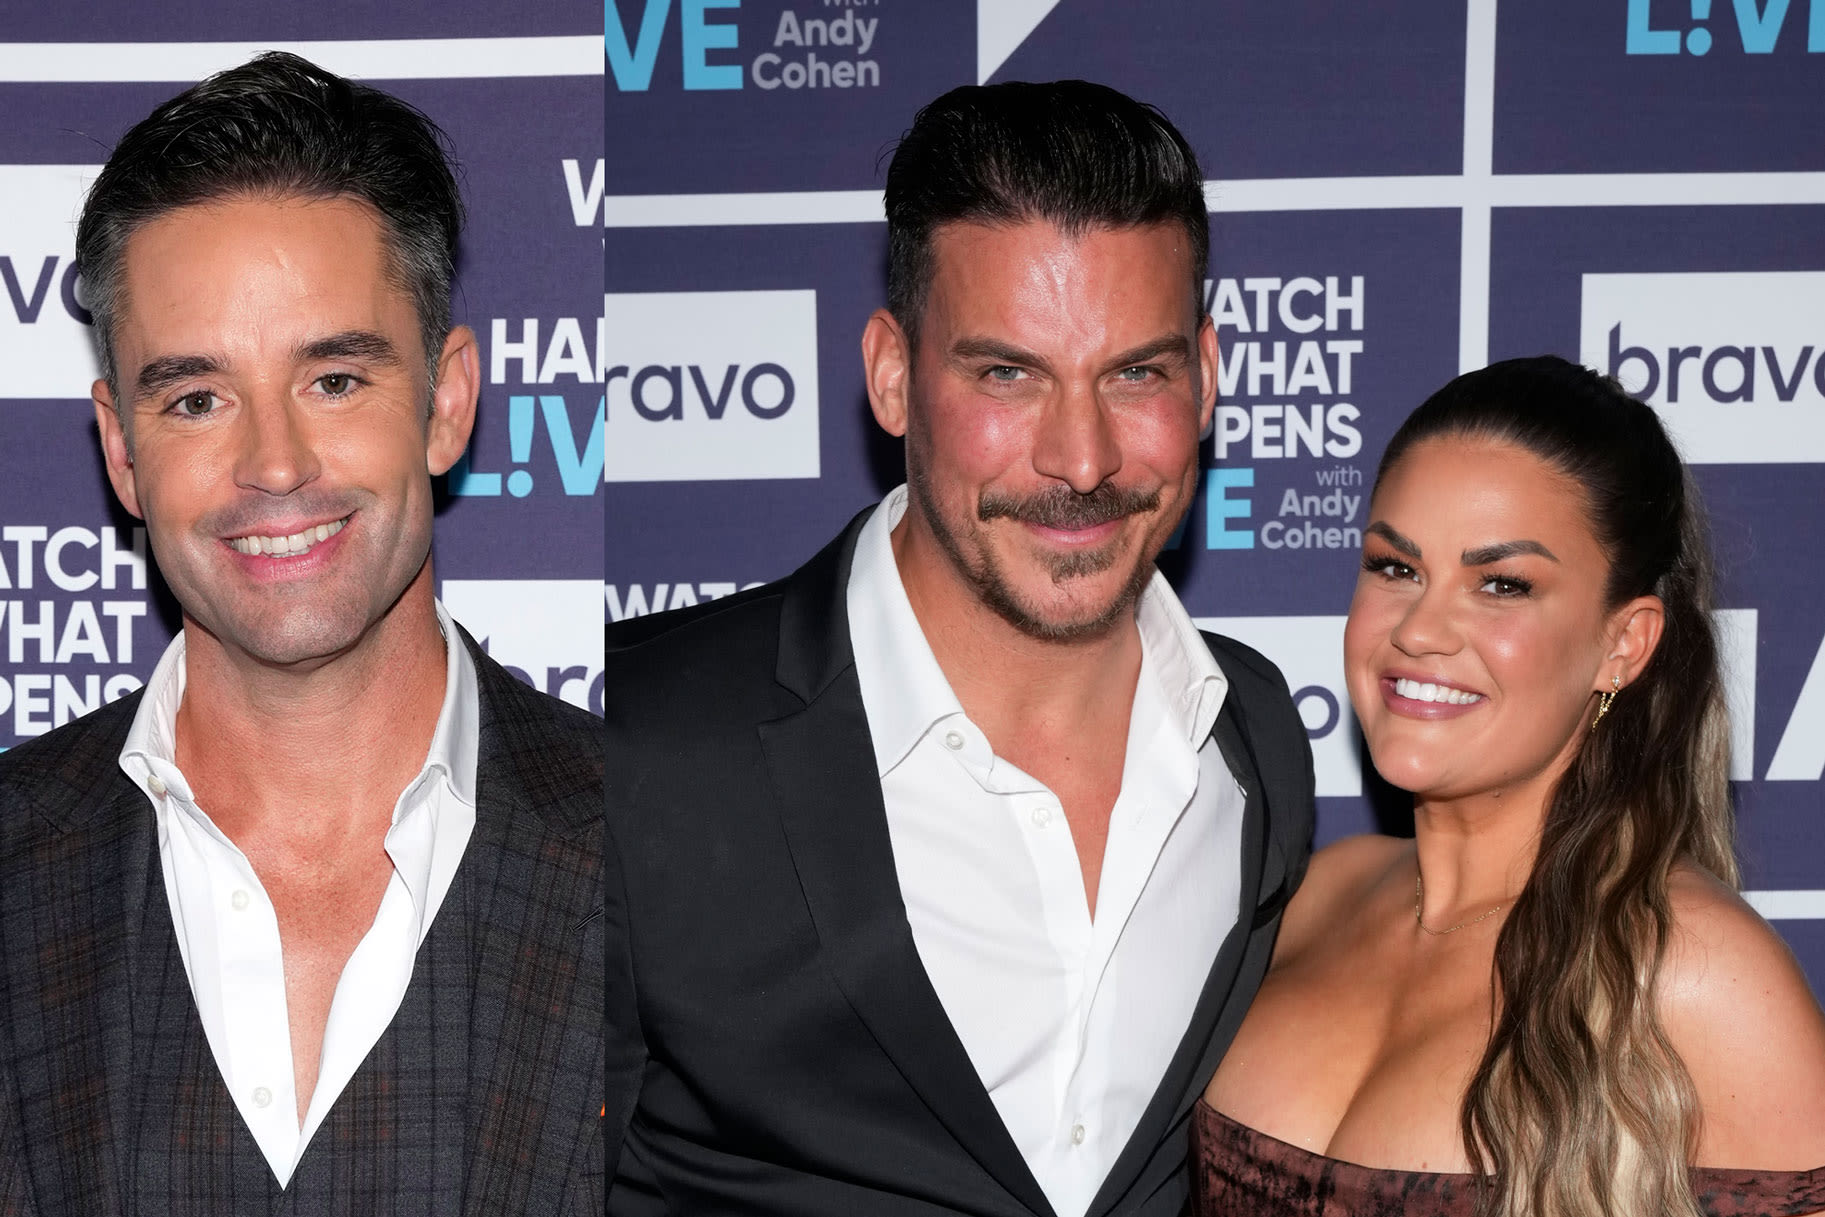 Jesse Lally Has a Surprising Take on Jax Taylor and Brittany Cartwright's Split: "I Hope..."